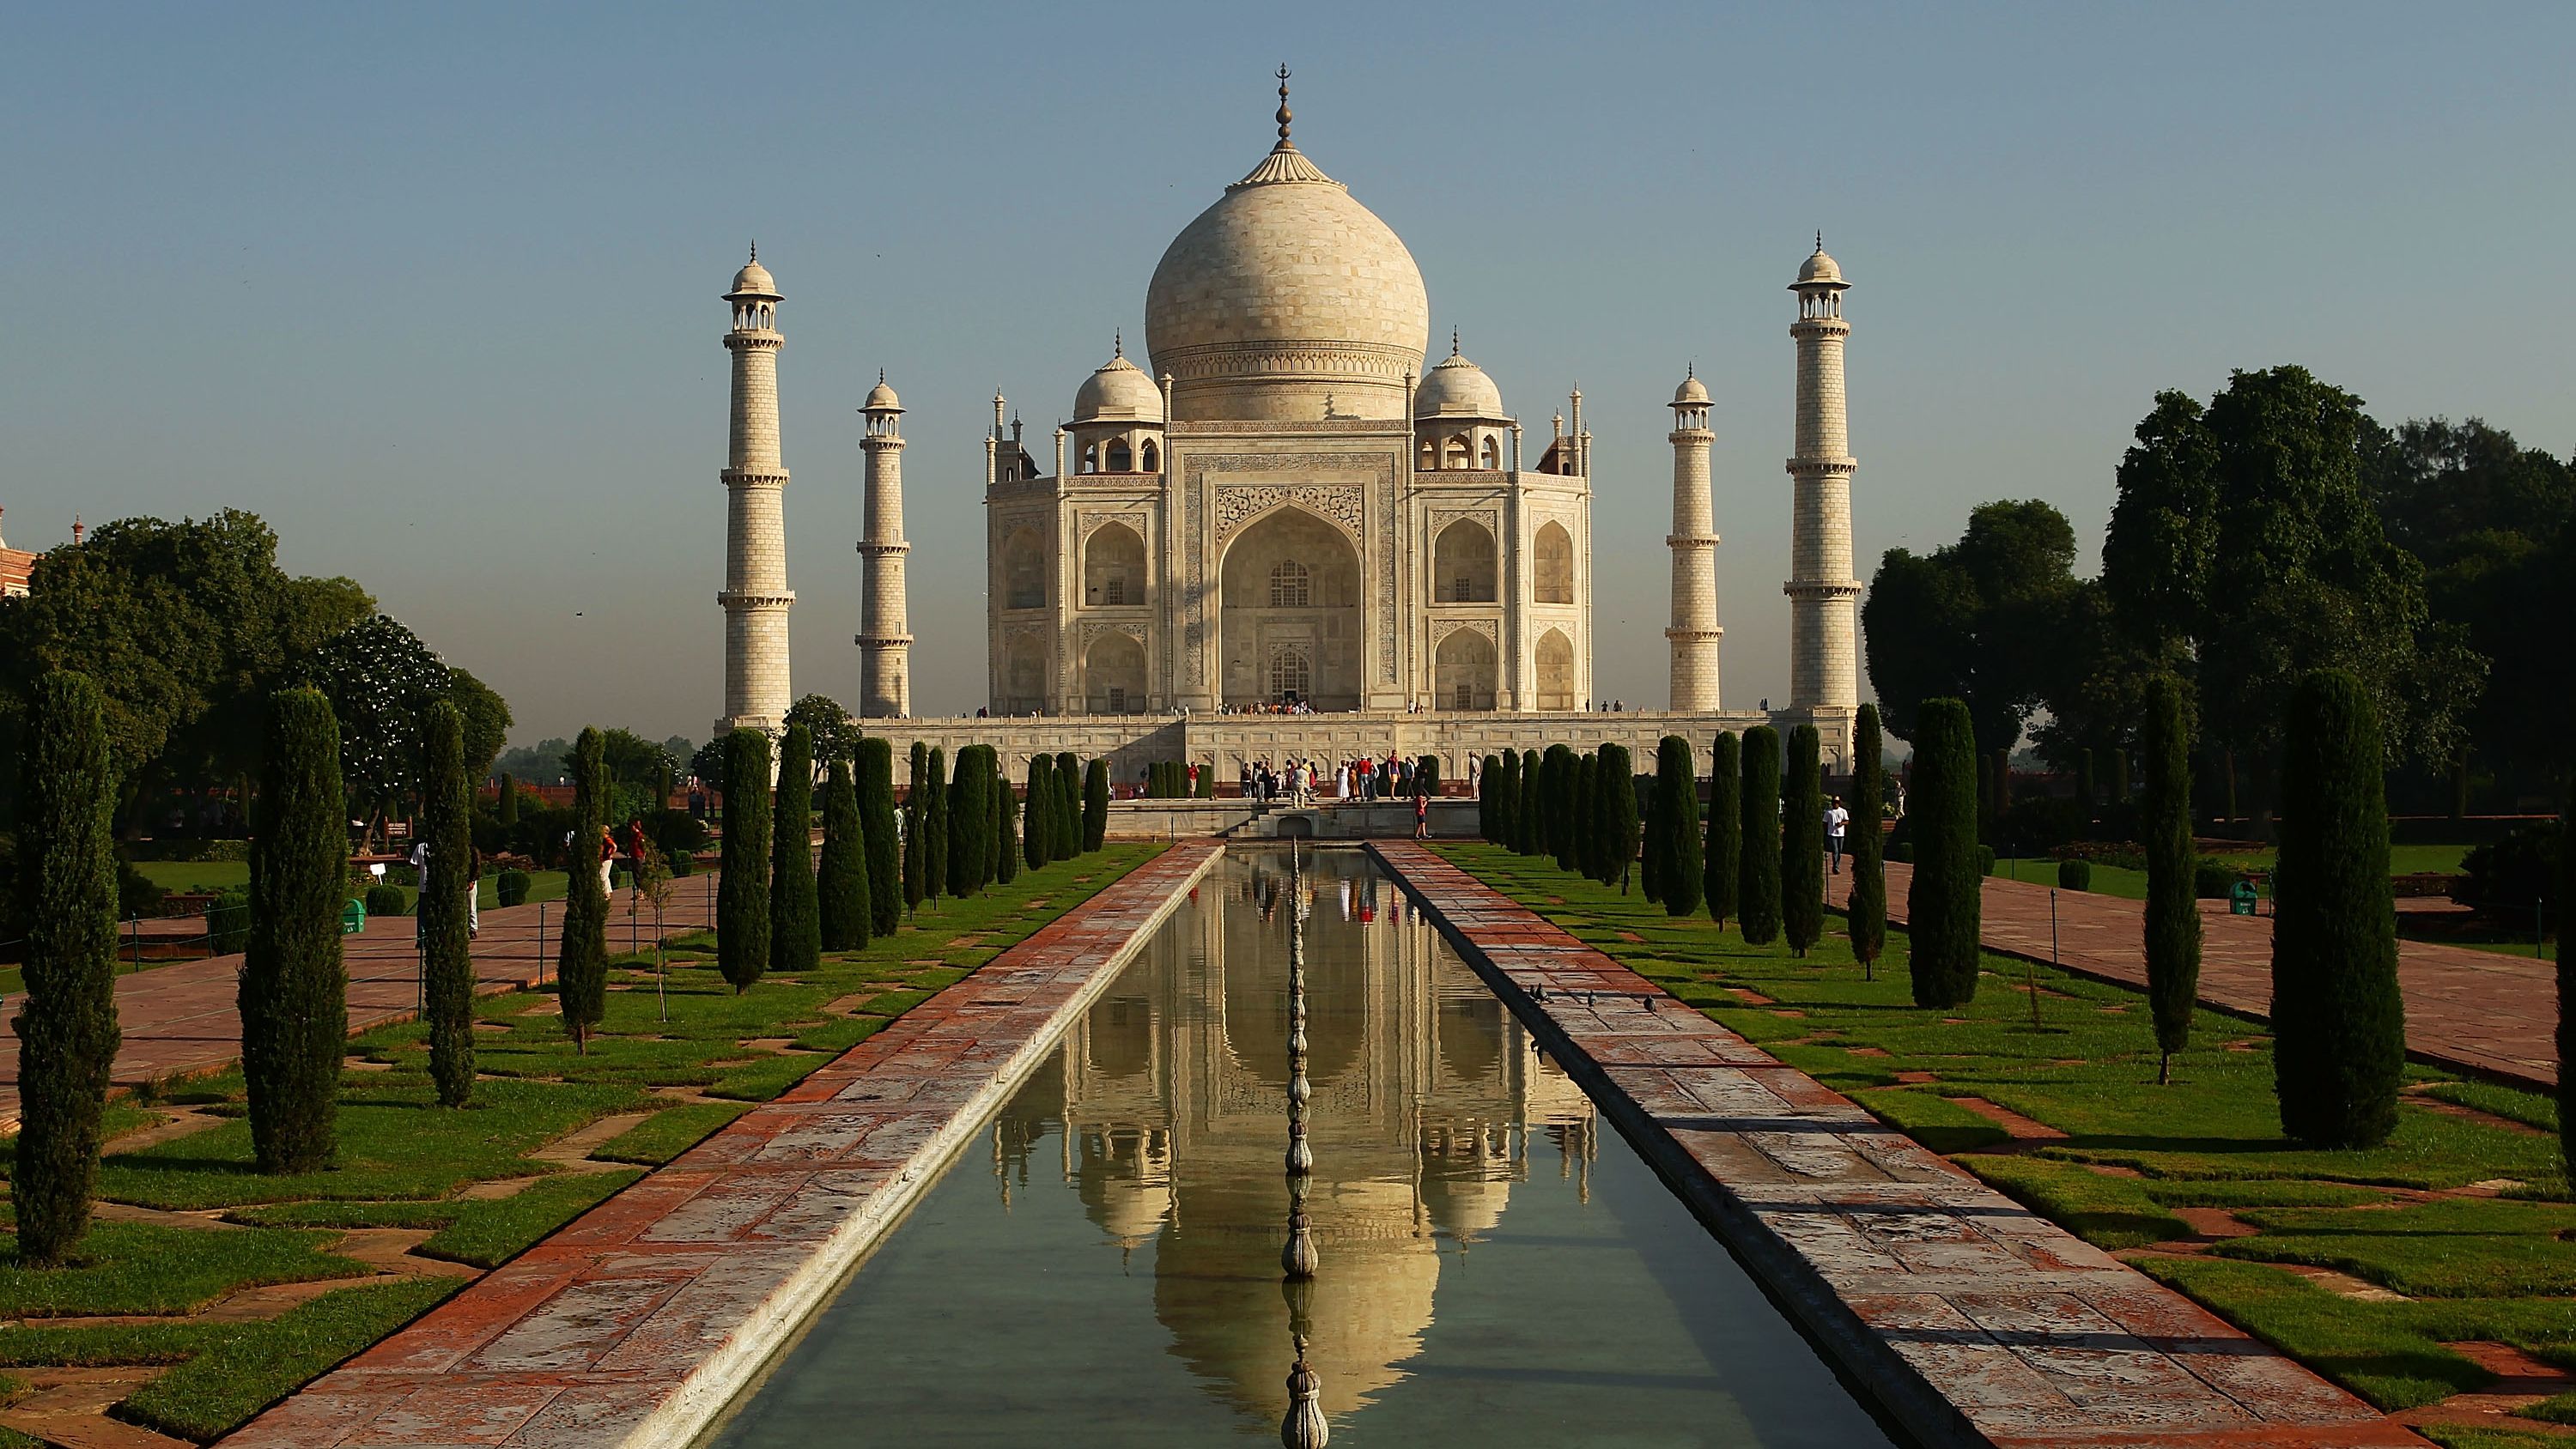 Construction of the Taj Mahal was completed in 1643. 